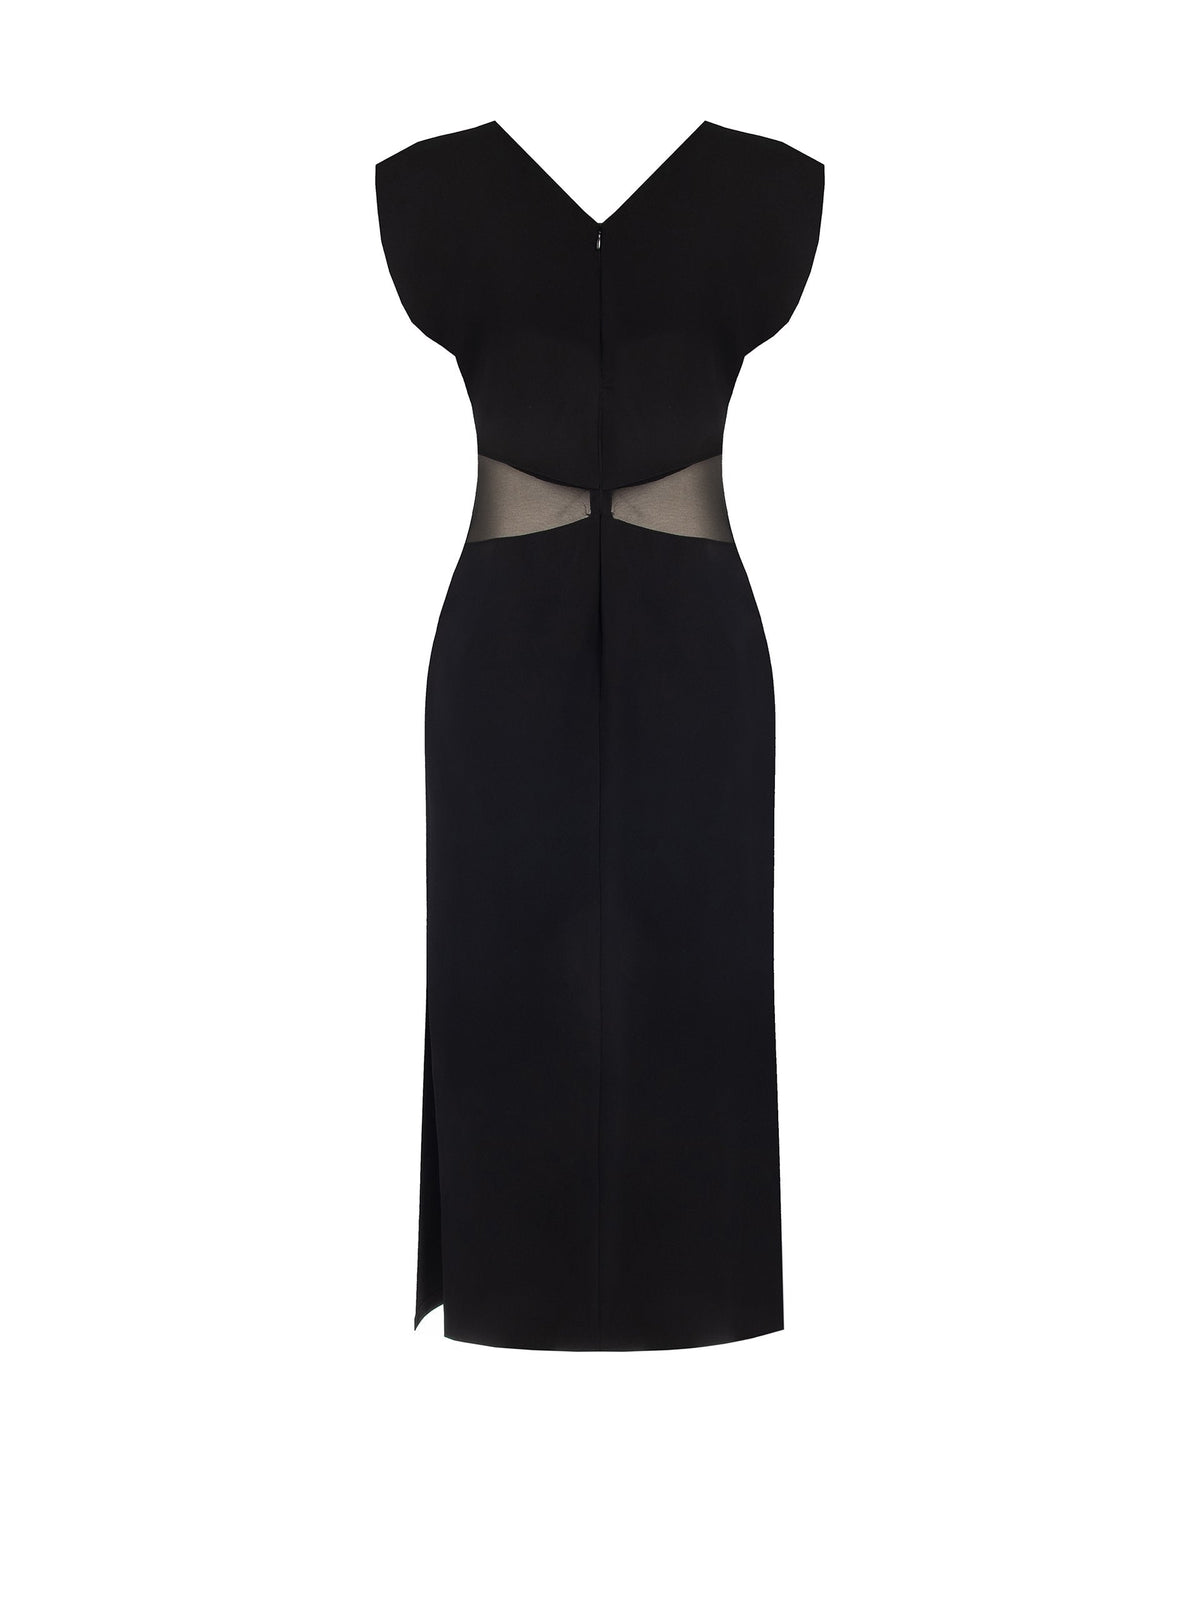 Sheath Dress in Technical Fabric with Shoulder Straps and Mesh Cut-Out